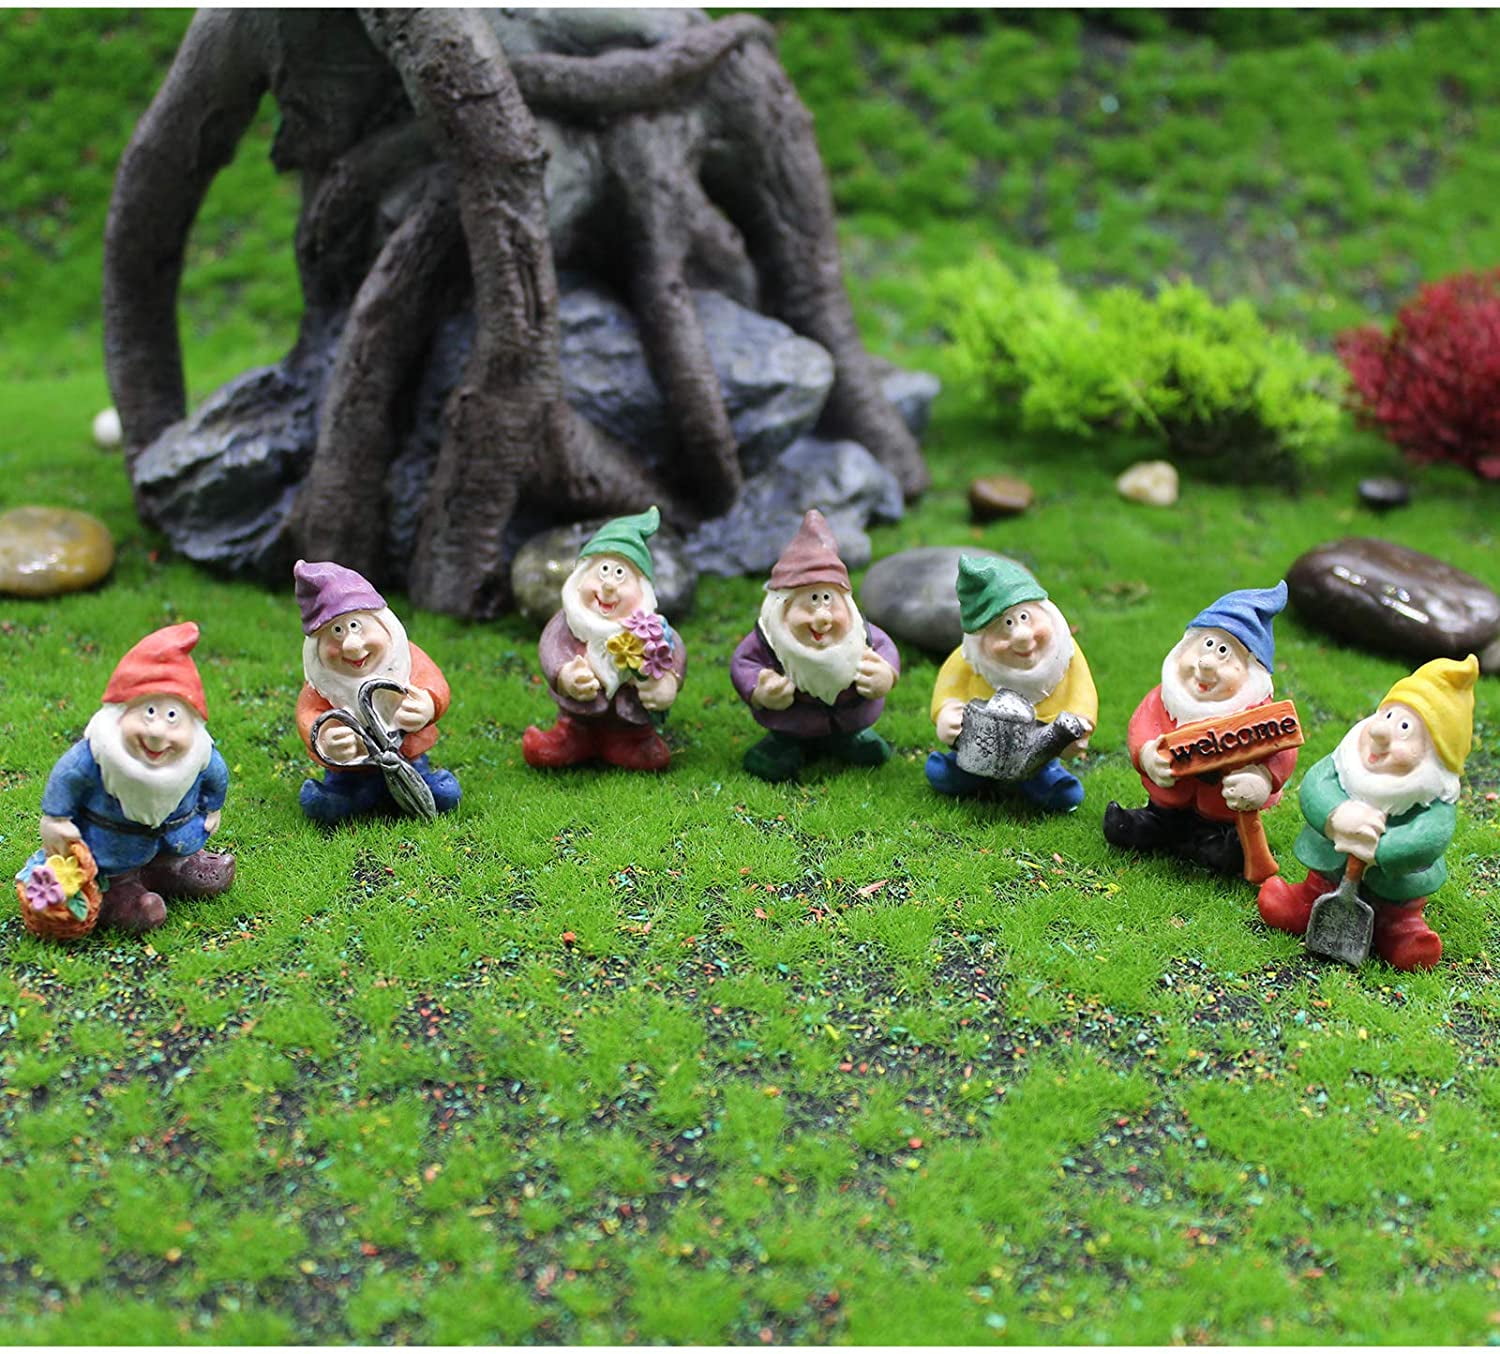 Fairy Garden Accessories,Say Hello to My Little Friend Gnome-Drunk Gnome Kit of 4pcs for Fairy Garden or Home Decoration 